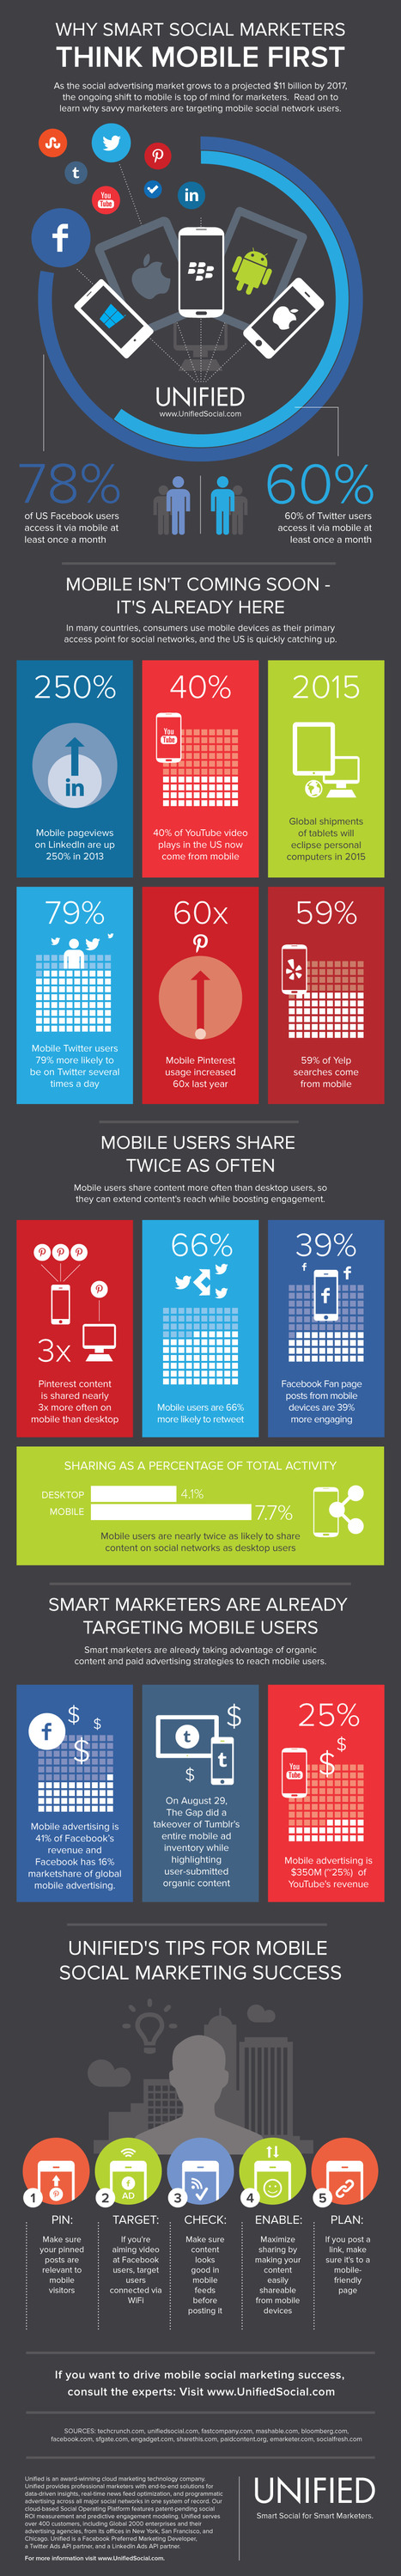 Why Smart Social Marketers Think Mobile First #infographic | MarketingHits | Scoop.it